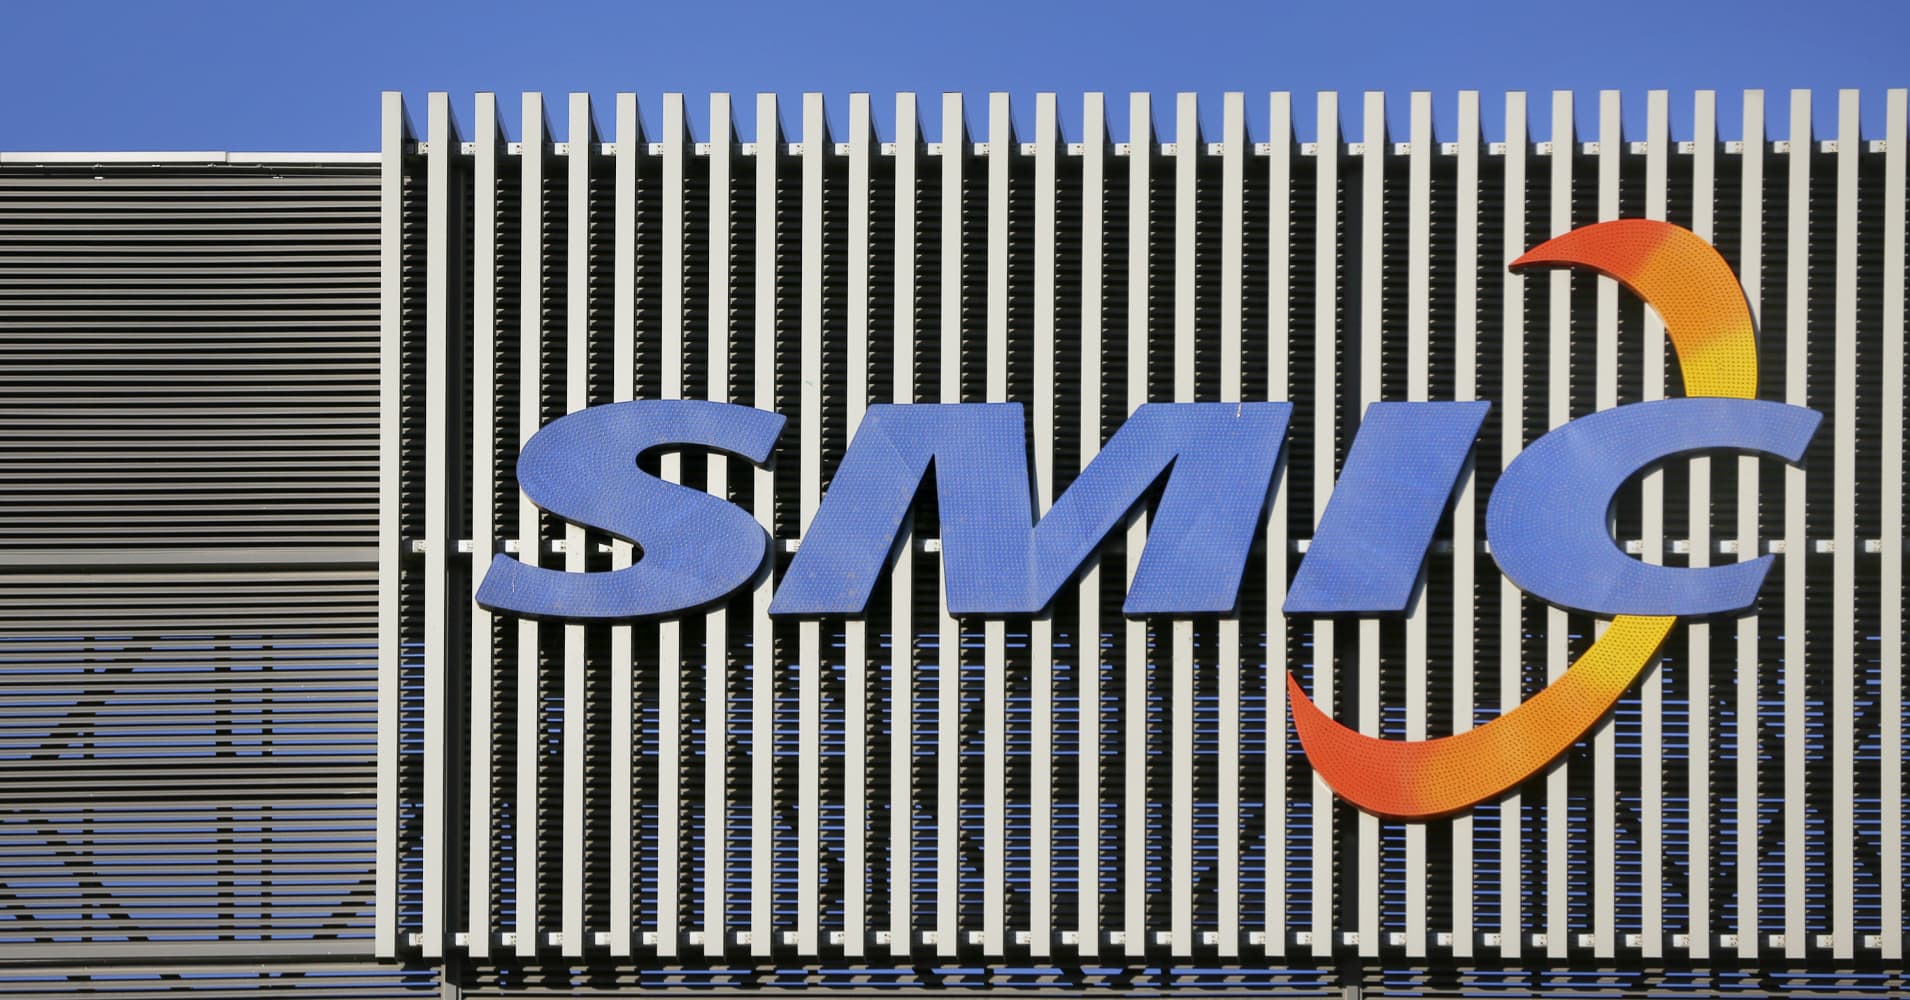 china's biggest chipmaker smic warns of 'fierce' competition as it misses quarterly profit expectations